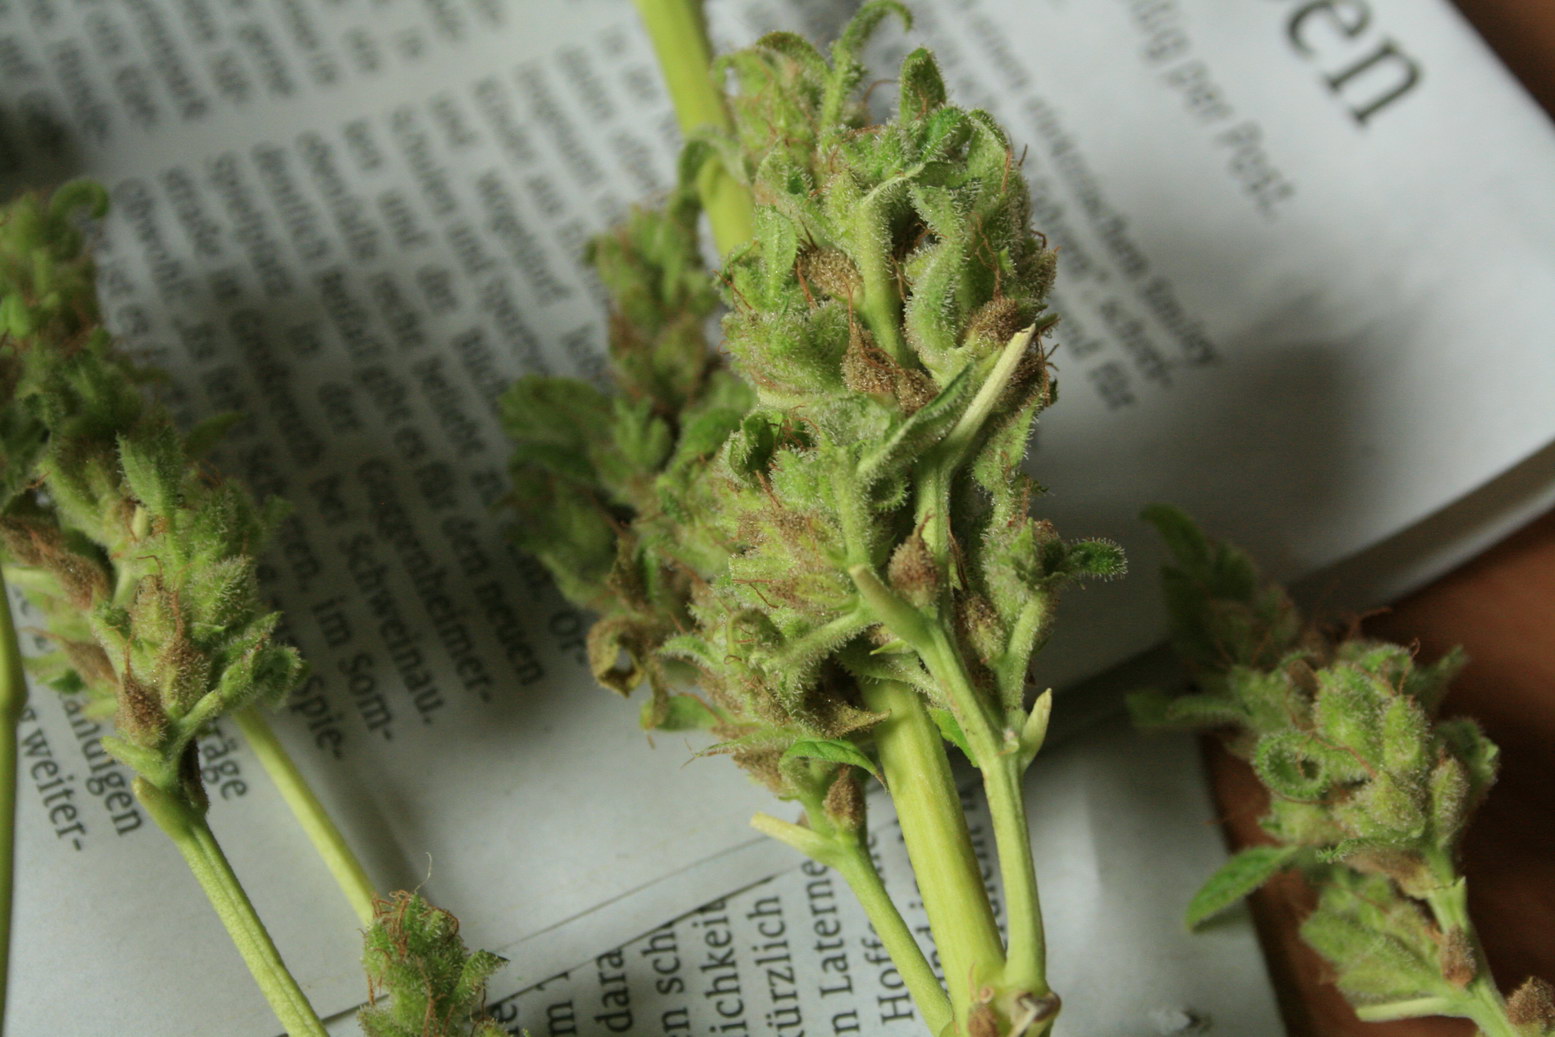 Over ripe buds or bud rot